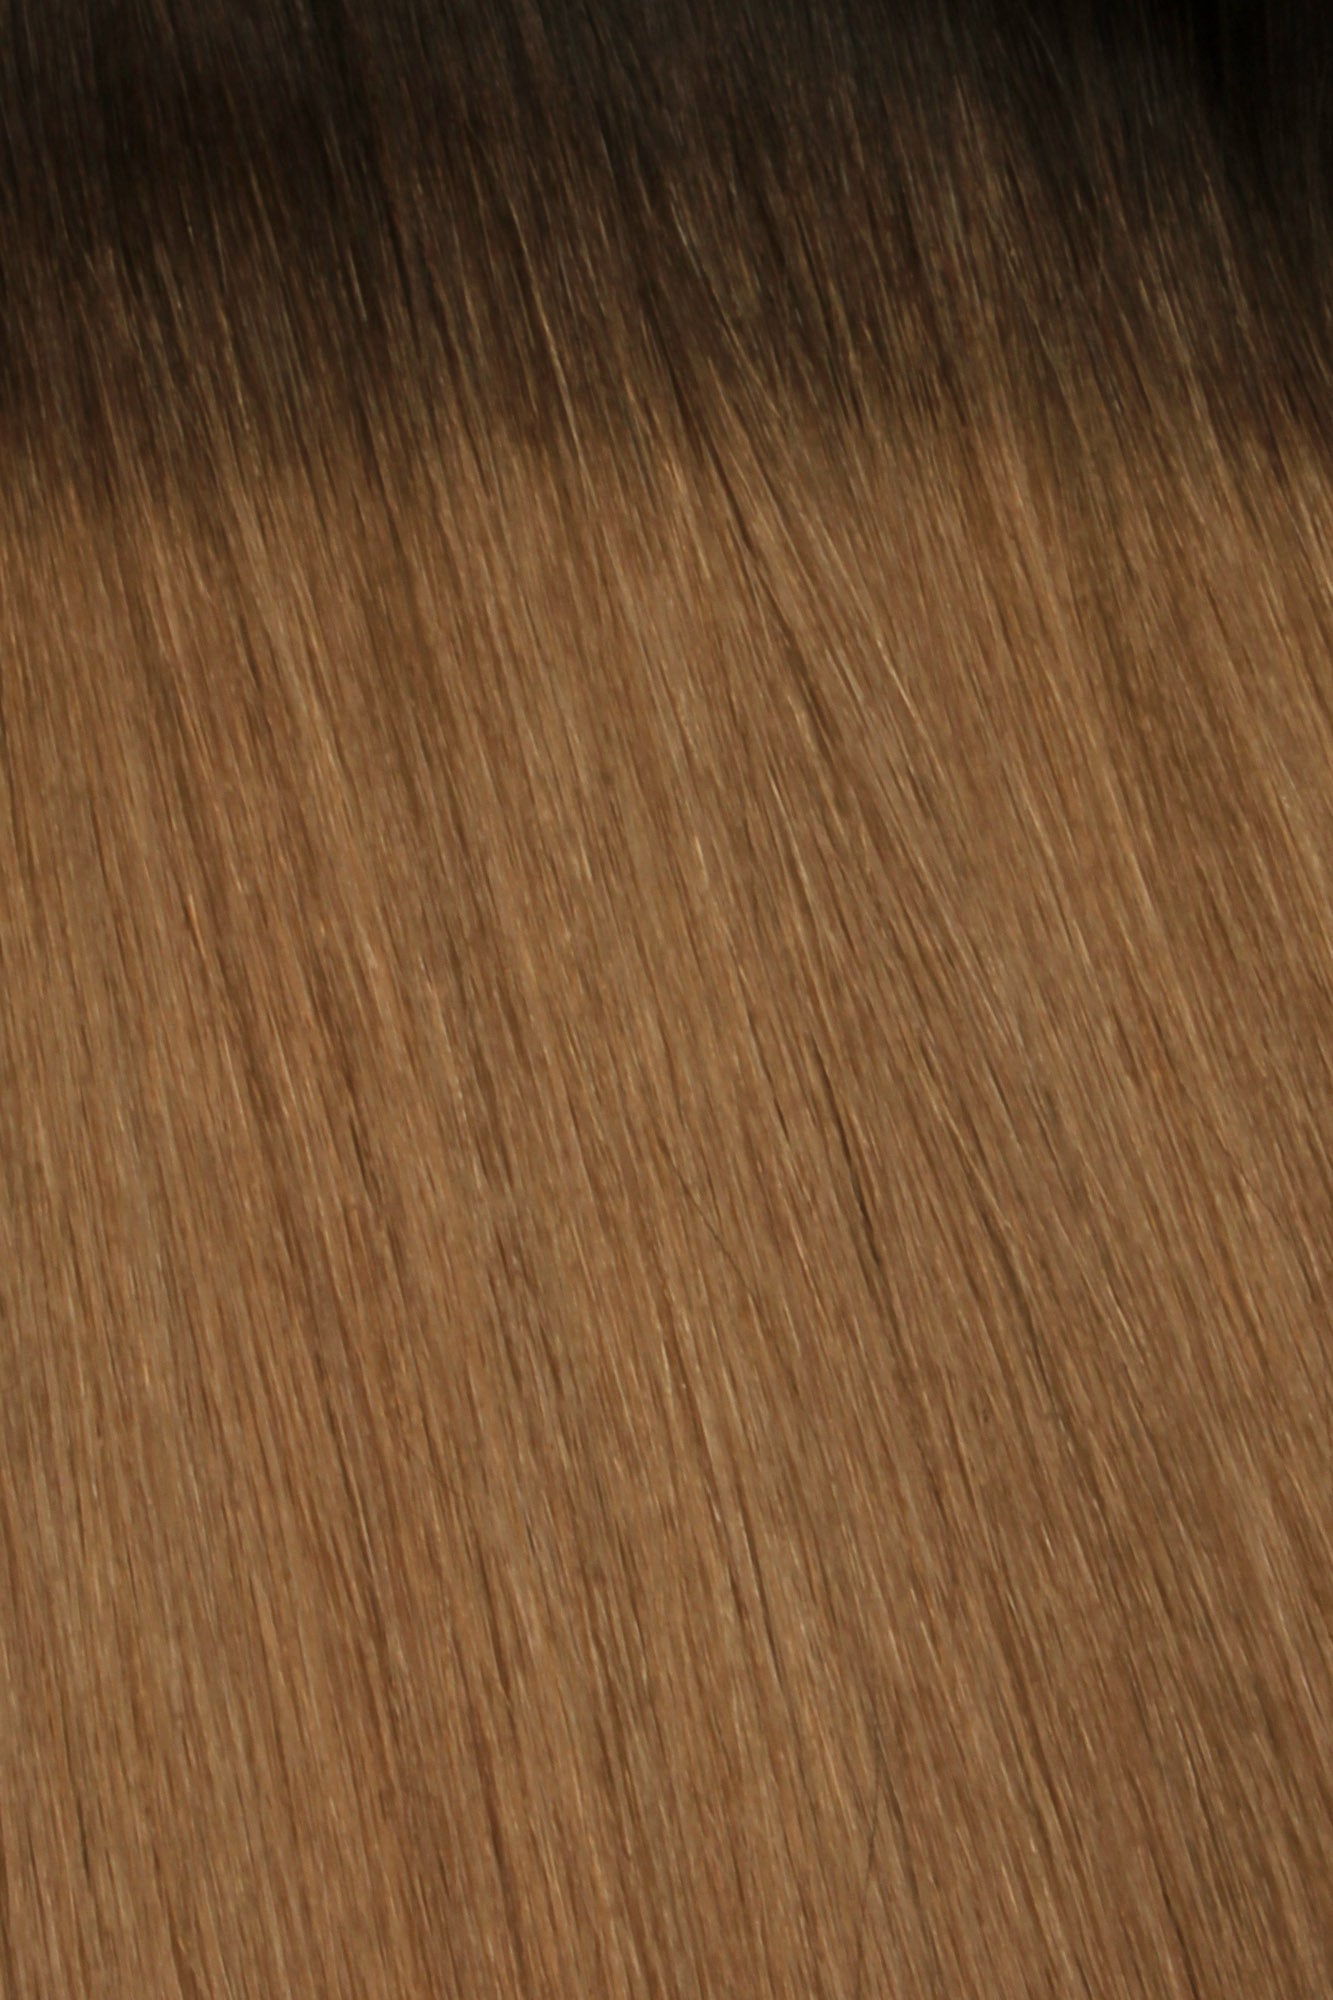 Nano Bonds 24 Inches - SWAY Hair Extensions Rooted-Chestnut-Brown-Mix-R2-4-6 Ultra-fine, invisible bonds for a flawless, natural look. 100% Remy Human hair, lightweight and versatile. Reusable and perfect for individual or salon use.